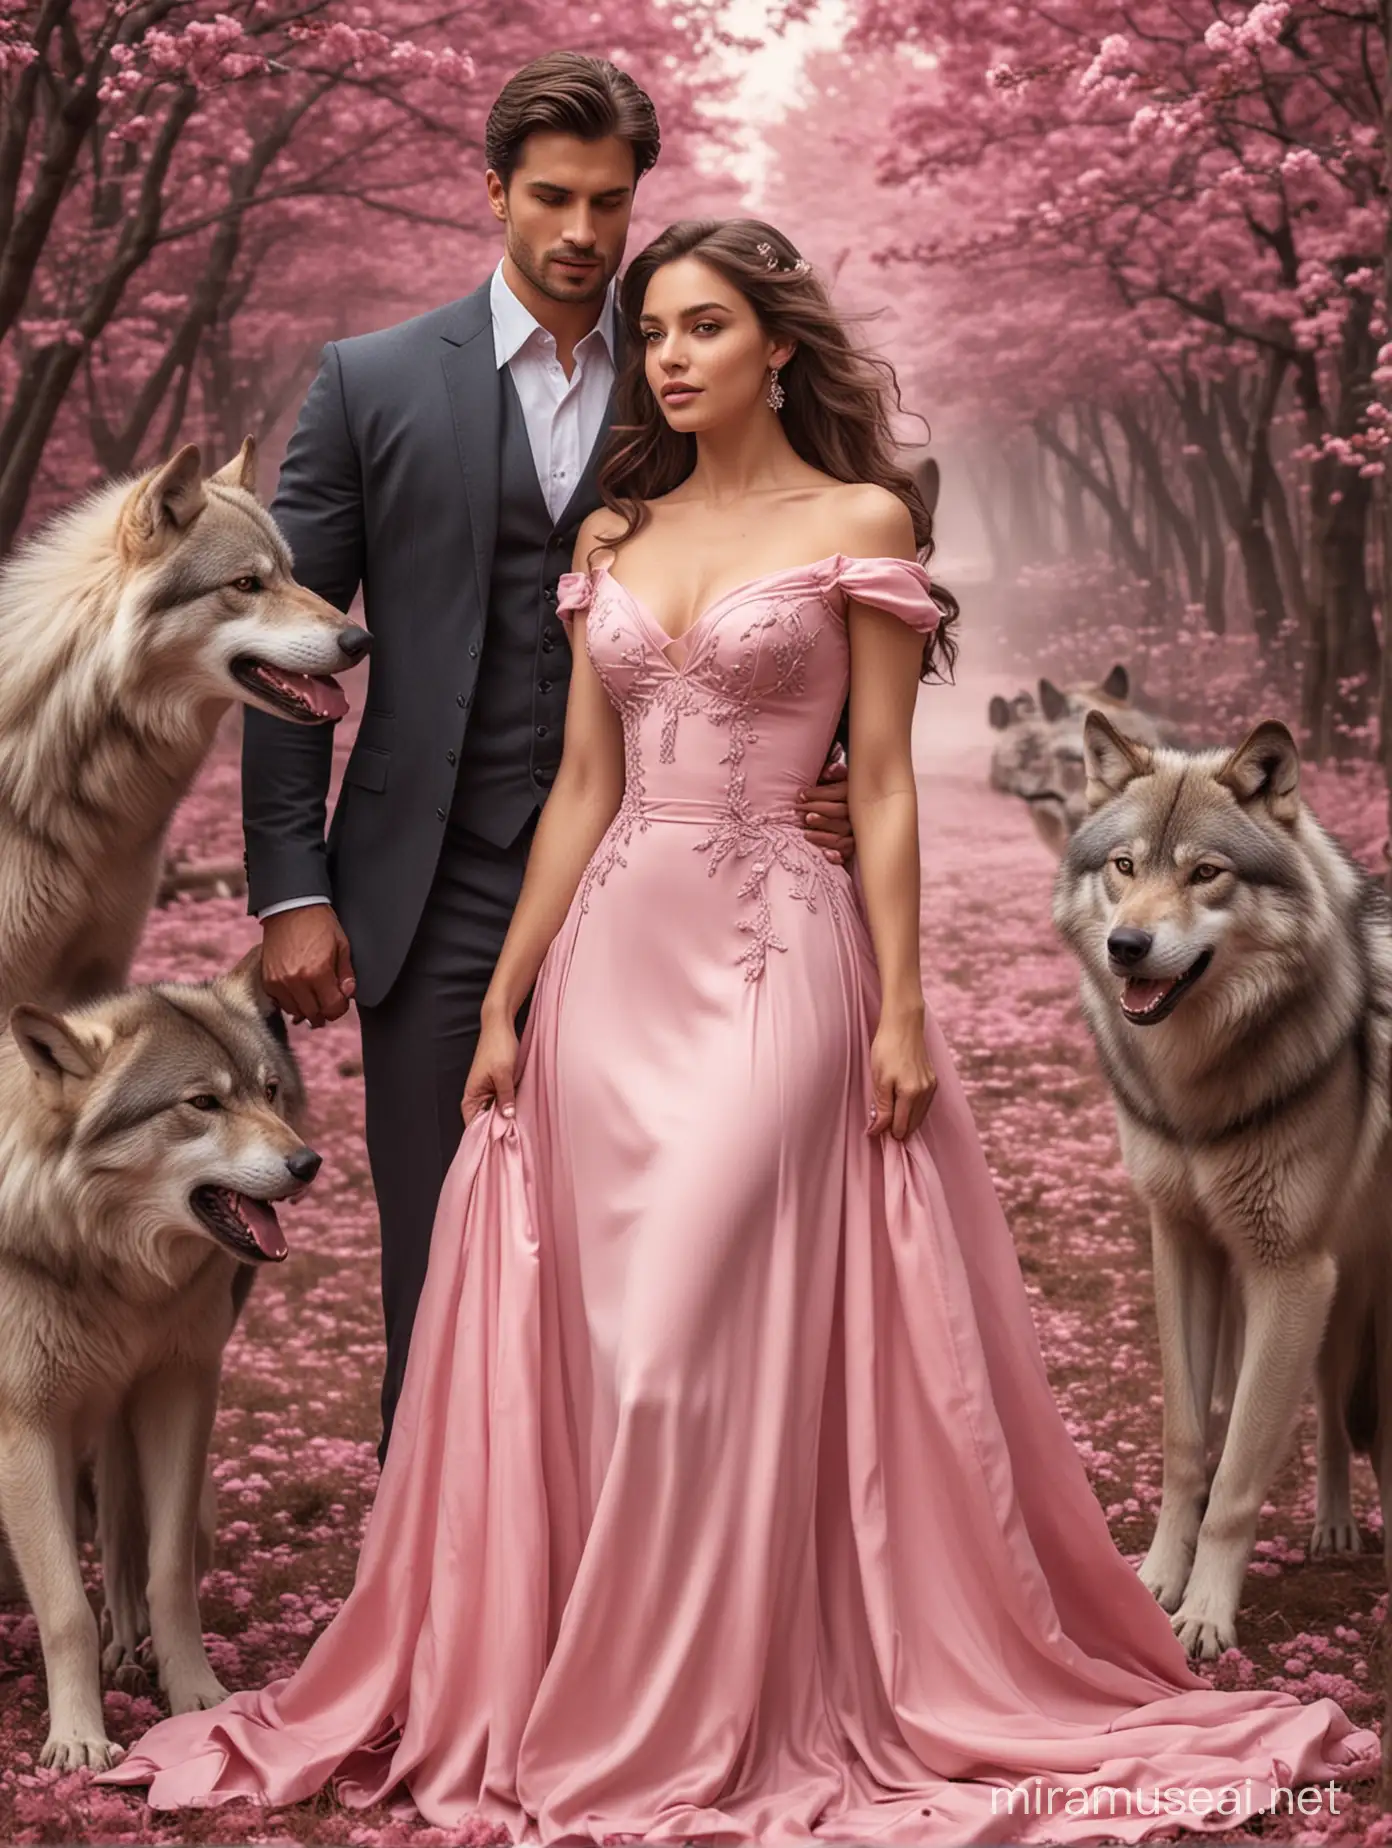 Romantic Couple Embraced by Wolves in Enchanting Forest